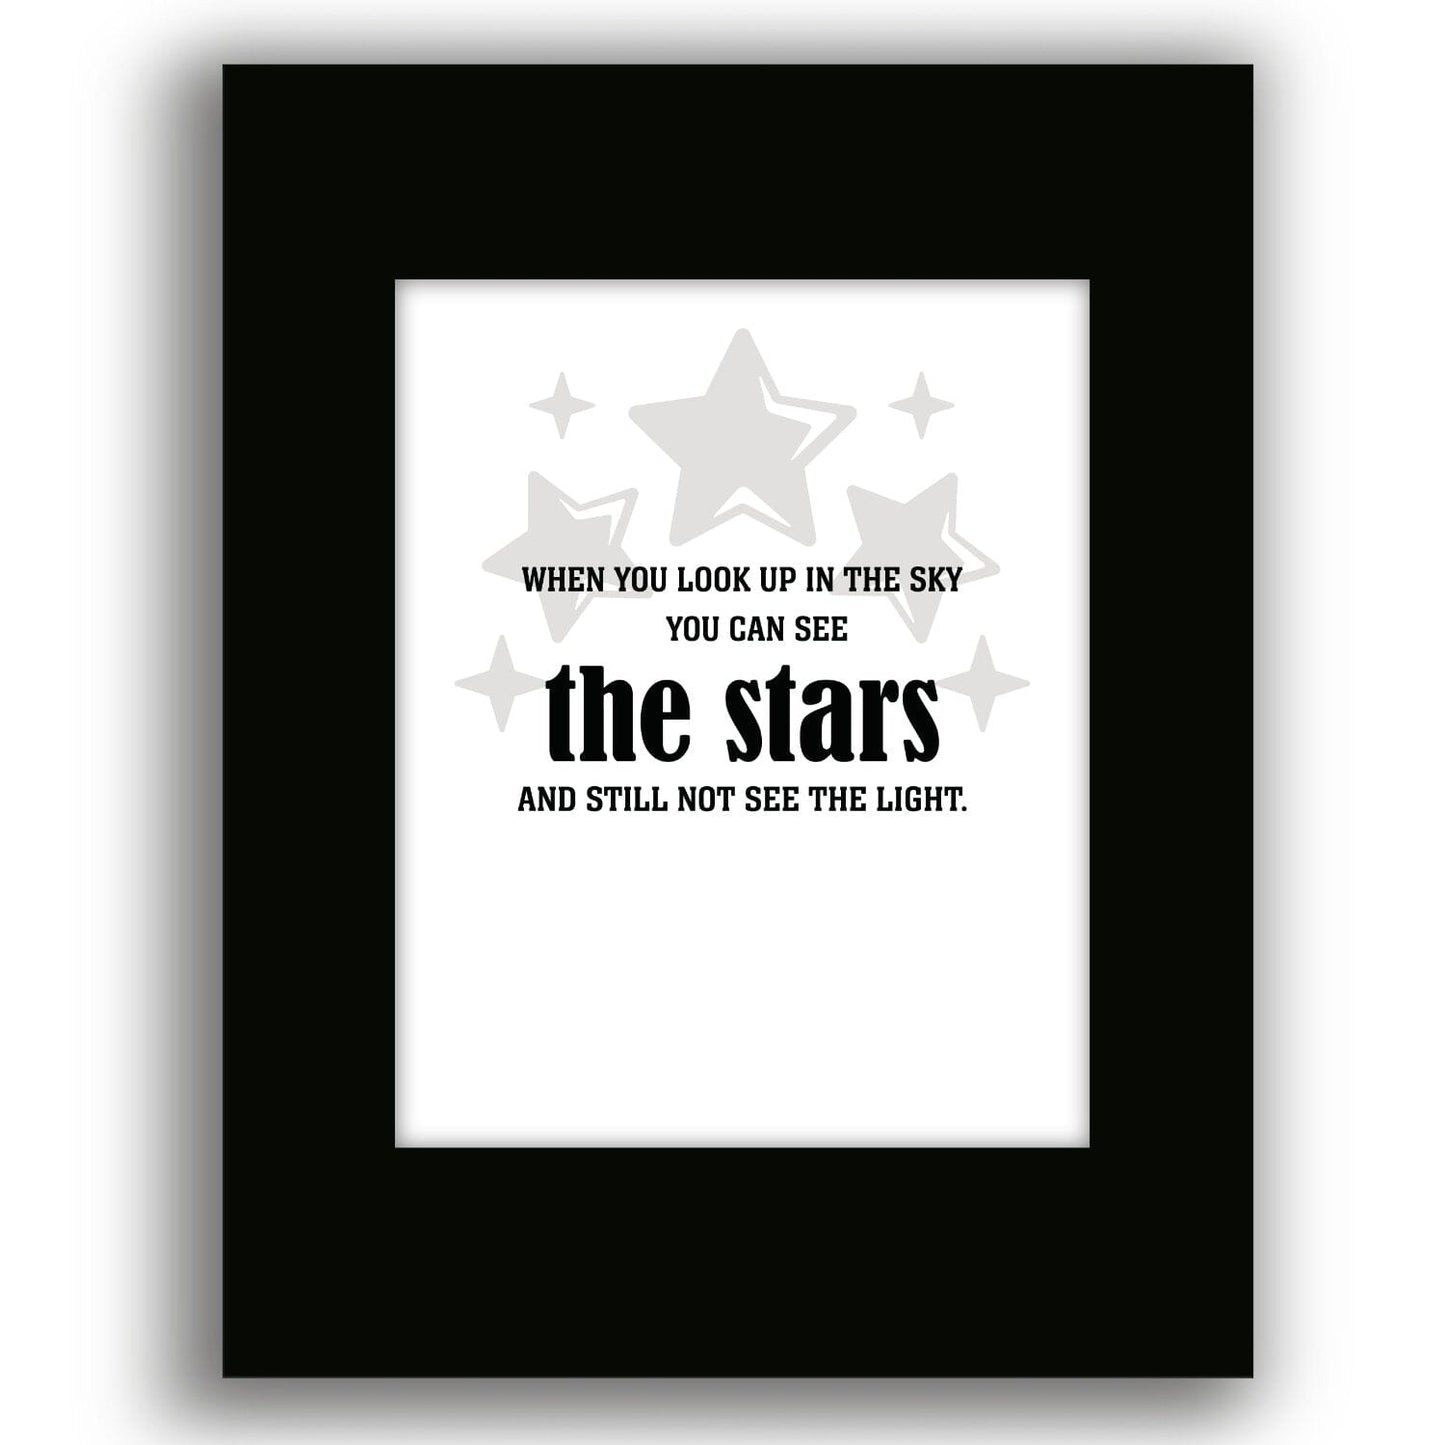 See the Stars and Still not see the Light - Wise and Witty Print Wise and Wiseass Quotes Song Lyrics Art 8x10 Black Matted Print 